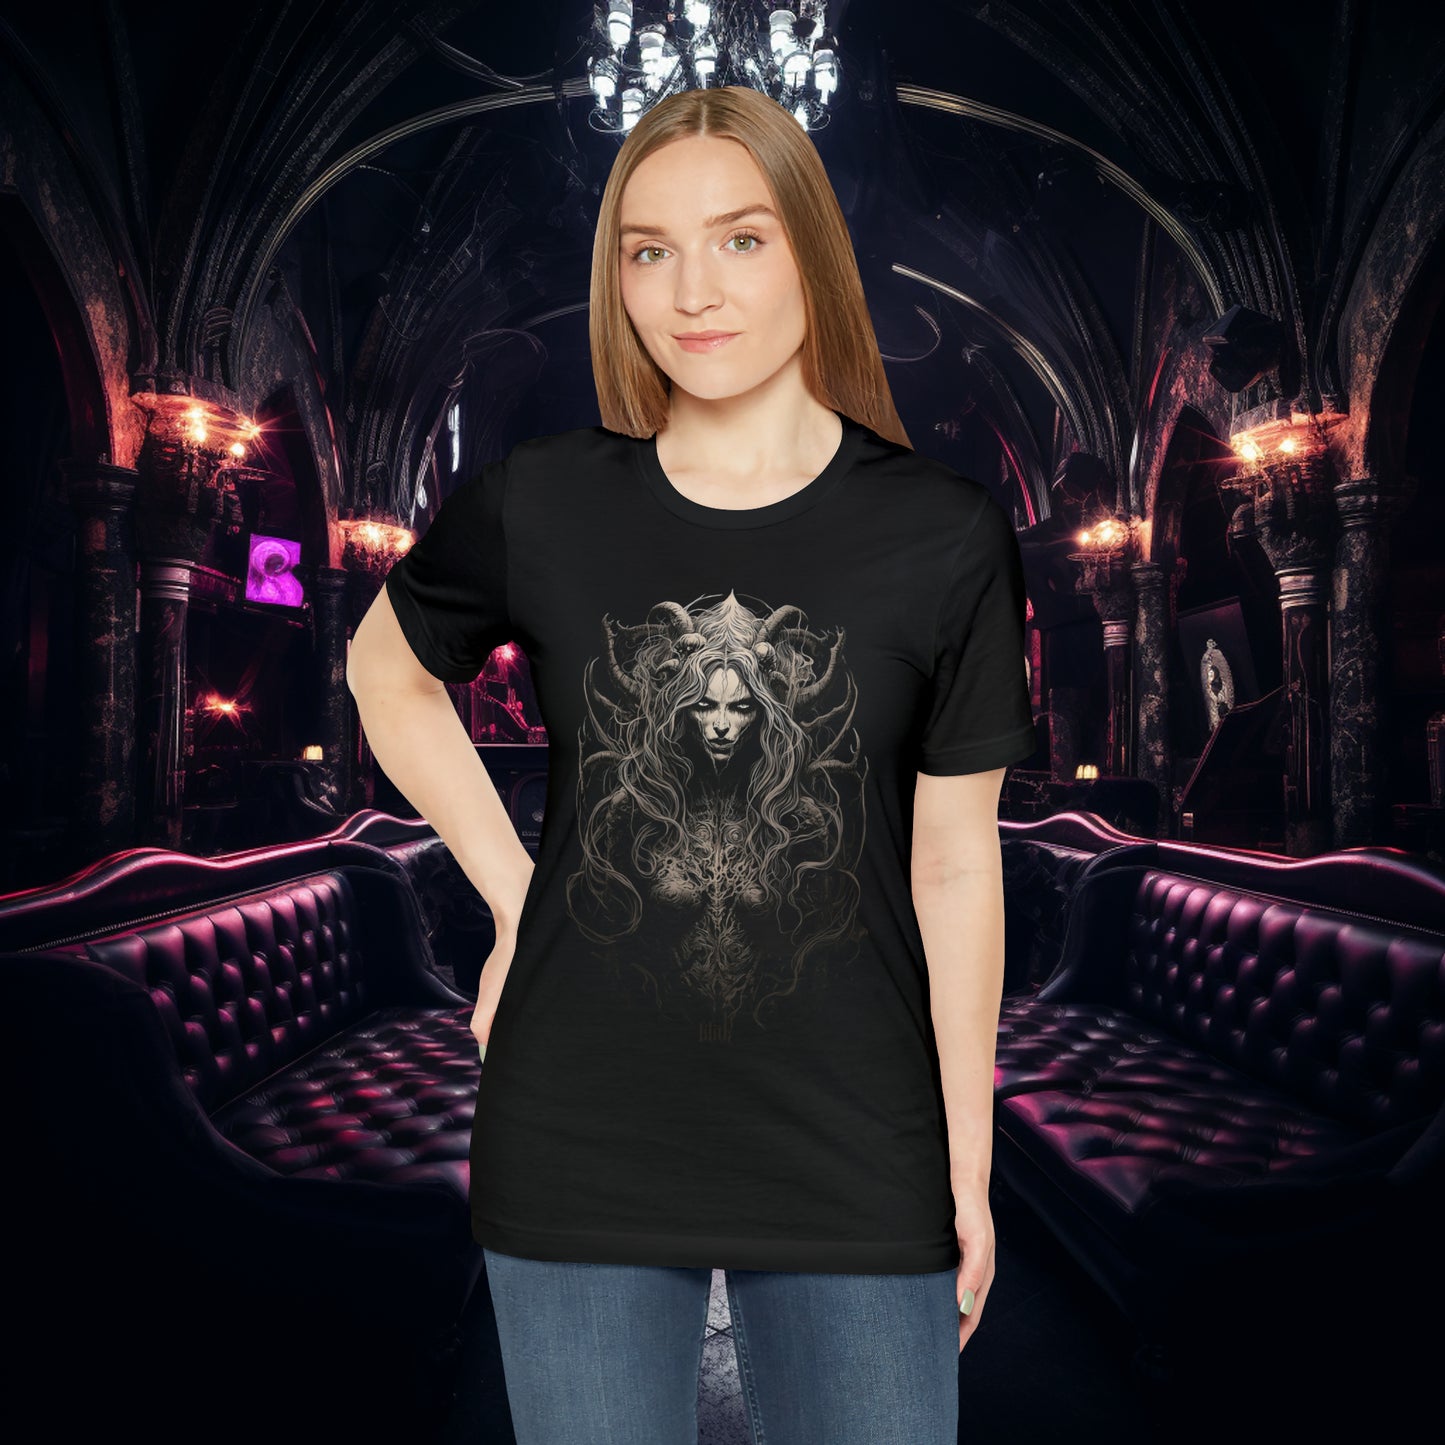 Lilith T-Shirt by Hellhound Clothing - Embrace Your Inner Rebel